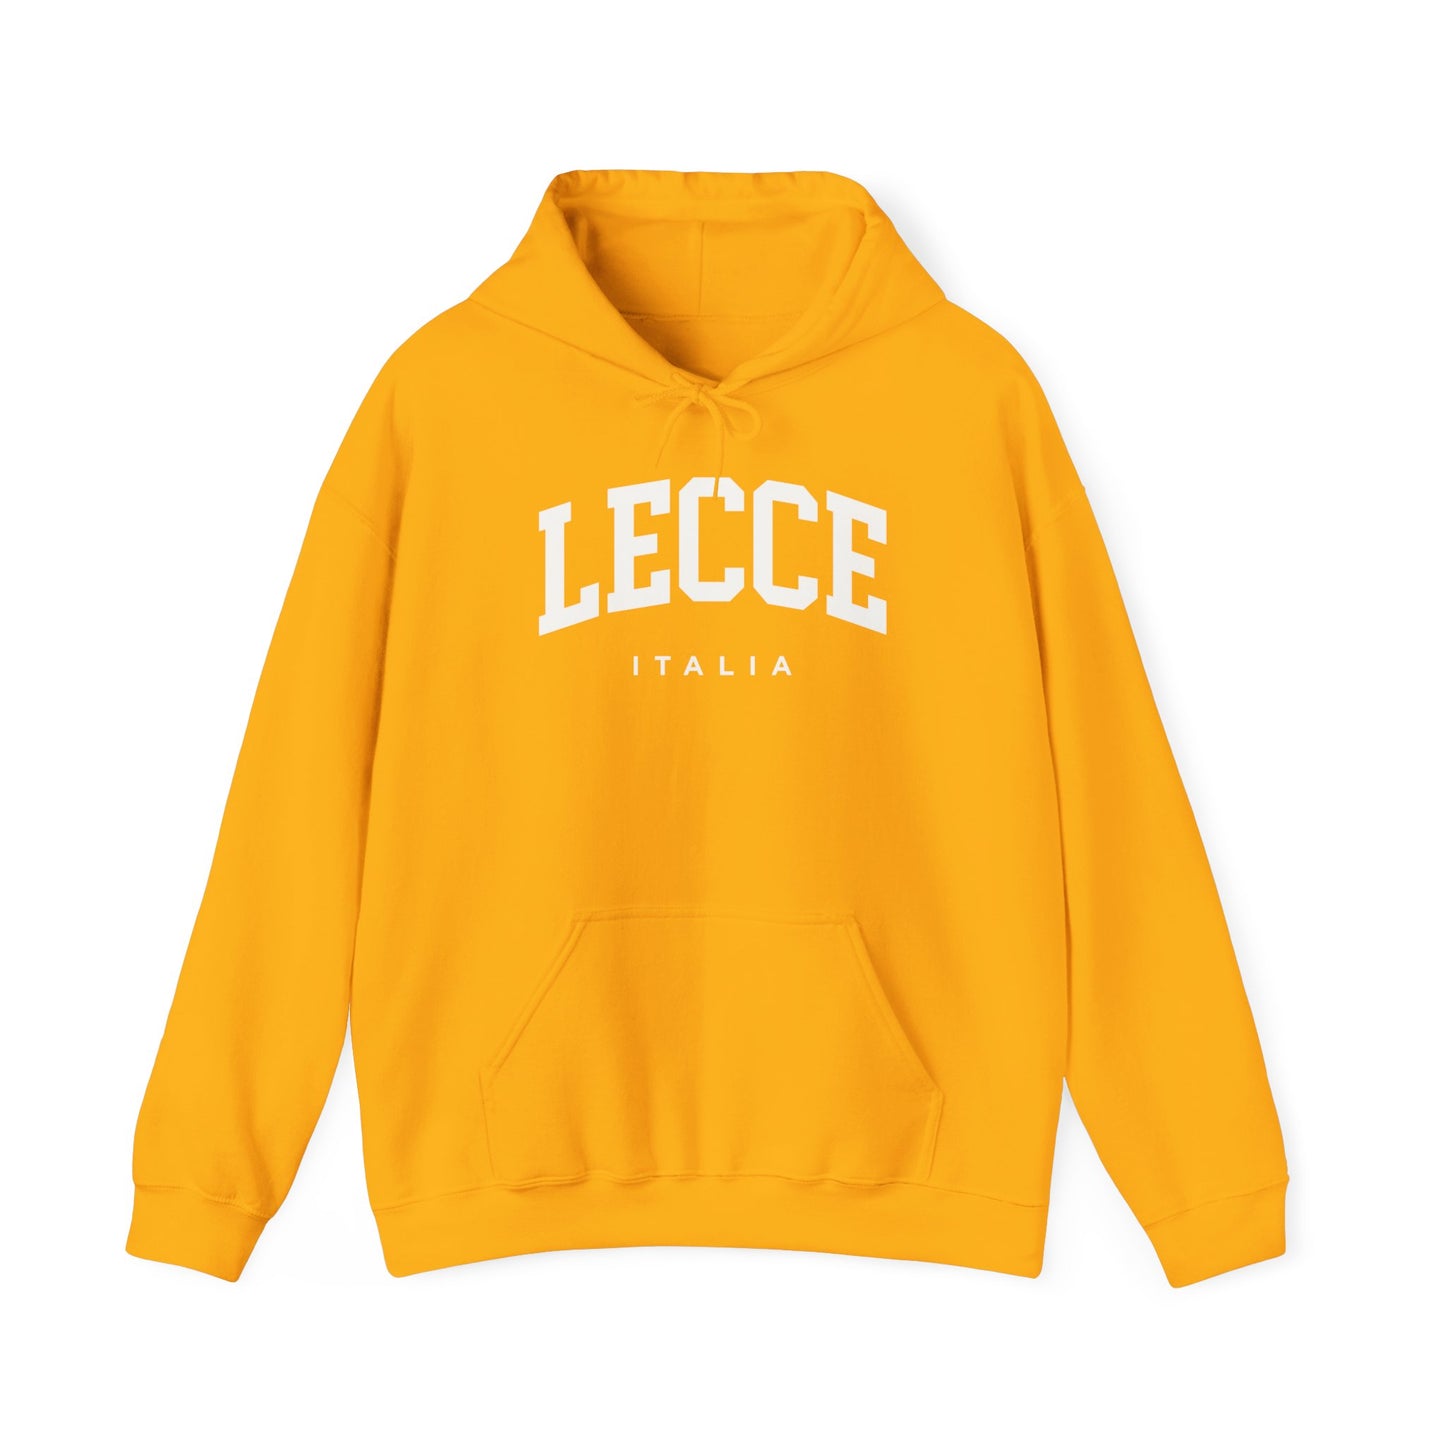 Lecce Italy Hoodie